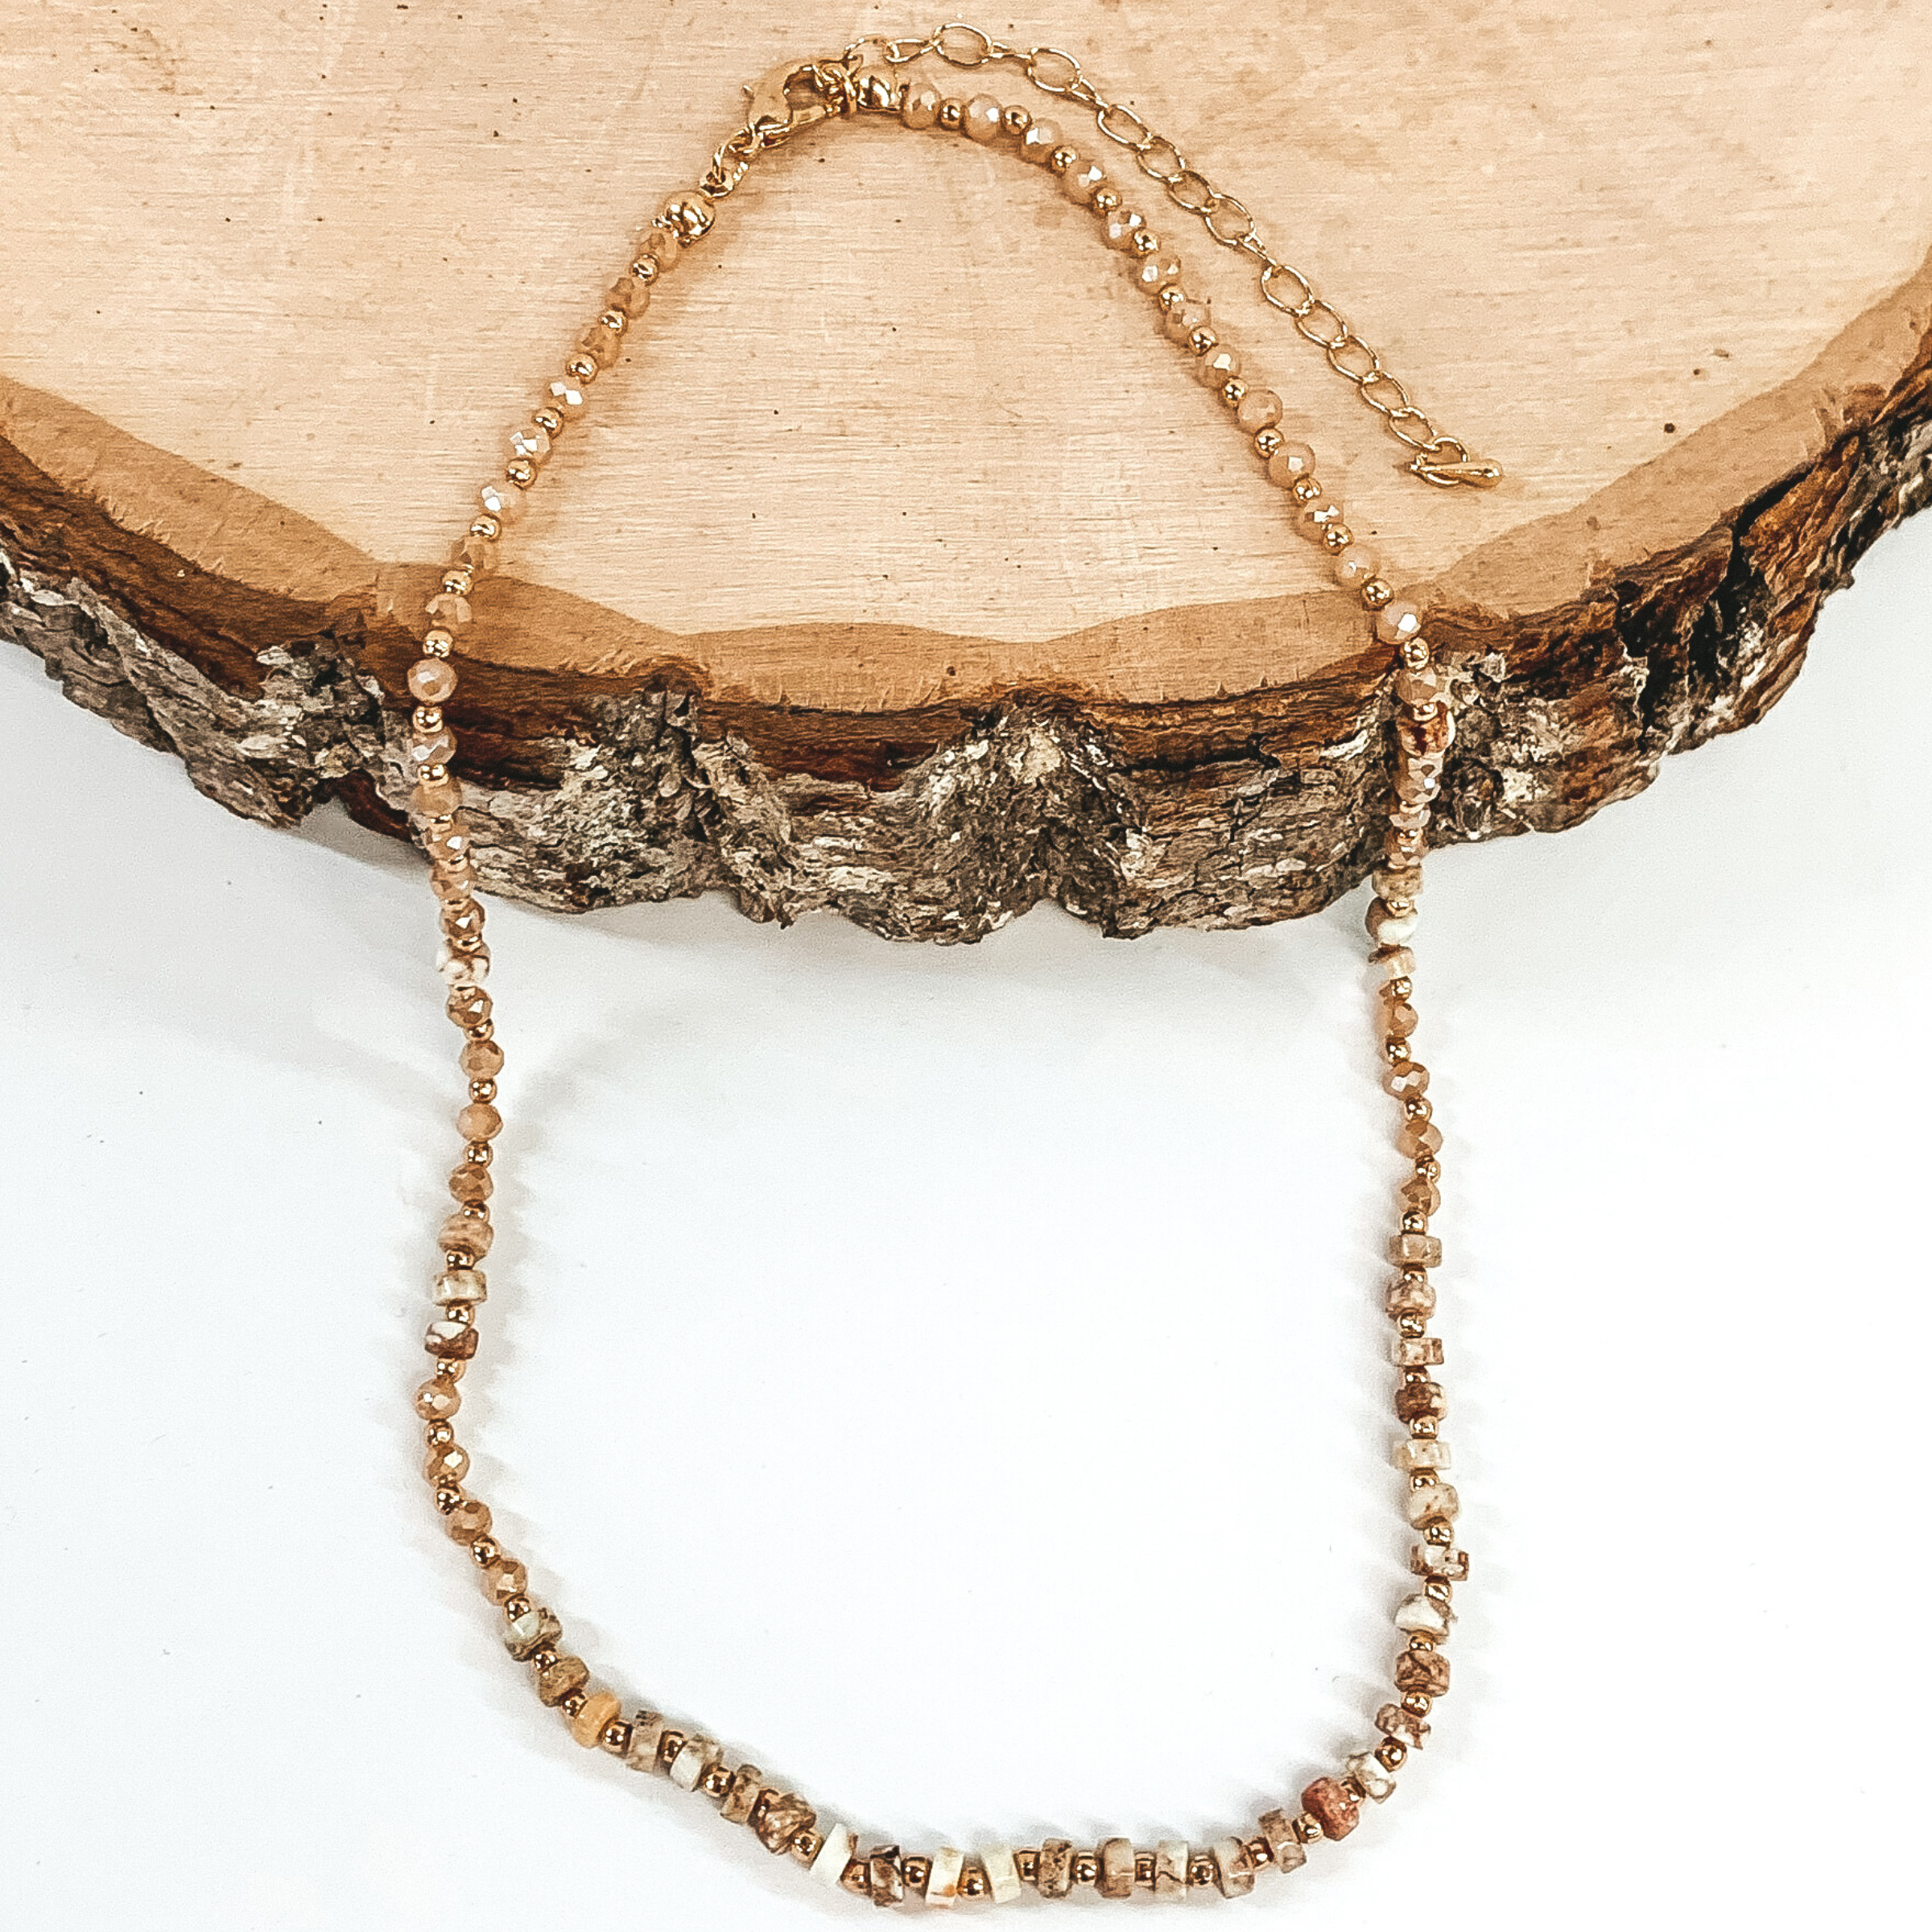 Tan marbled beads, tan crystal beads, and gold spacer beads strung together on an adjustable necklace. This necklace is pictured partly laying on a piece of wood on a white background. 